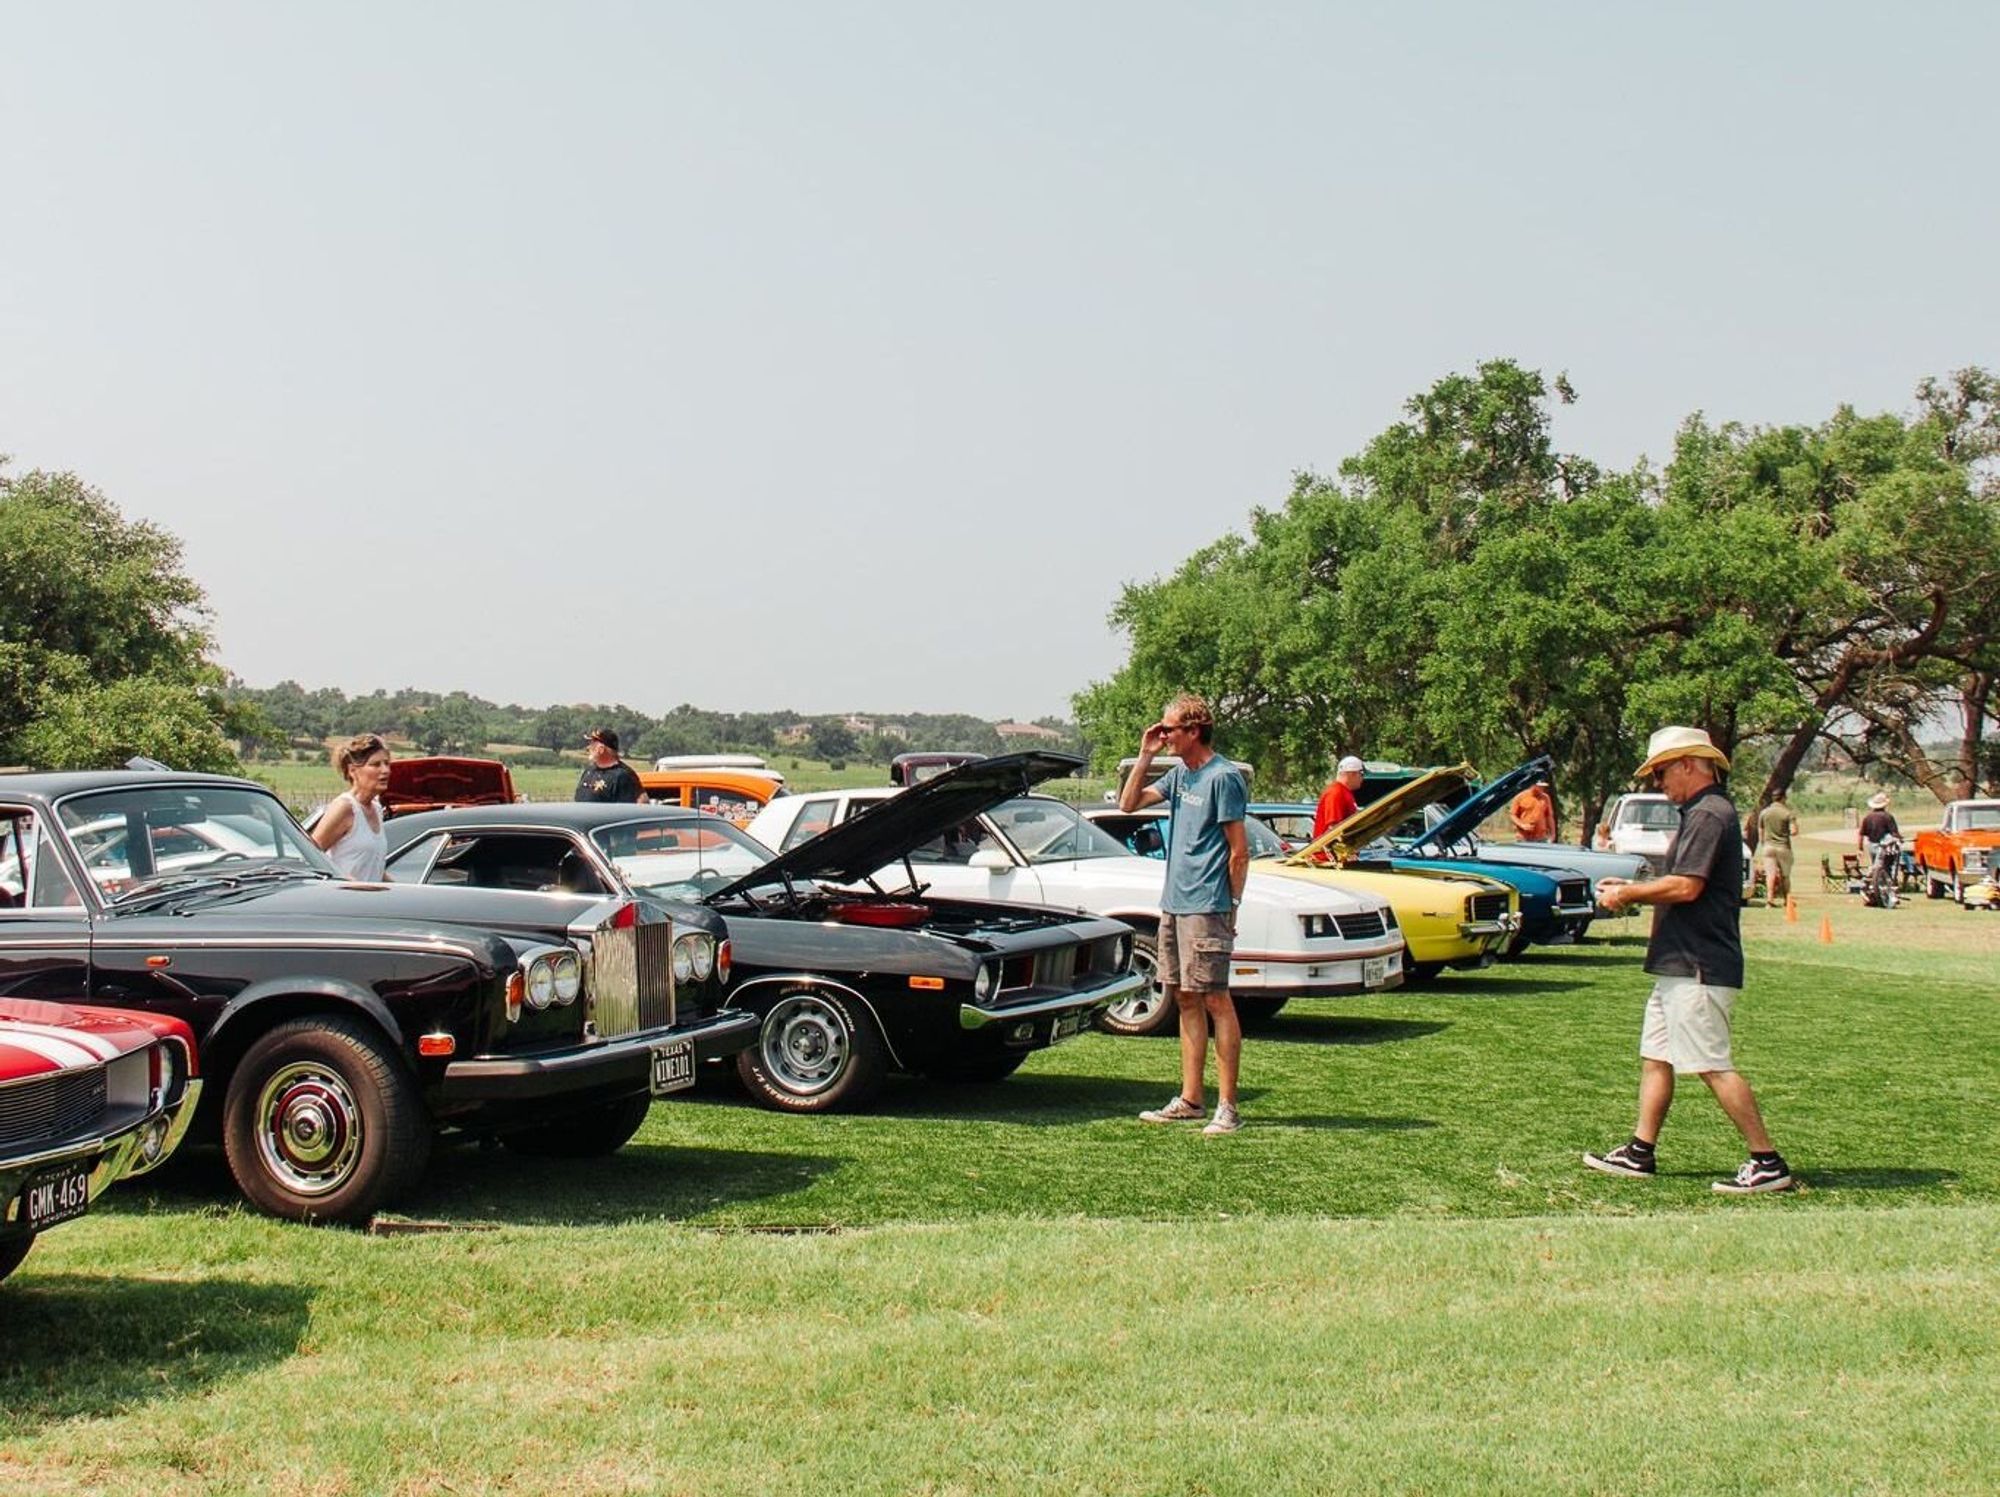 The Vineyard at Florence car show